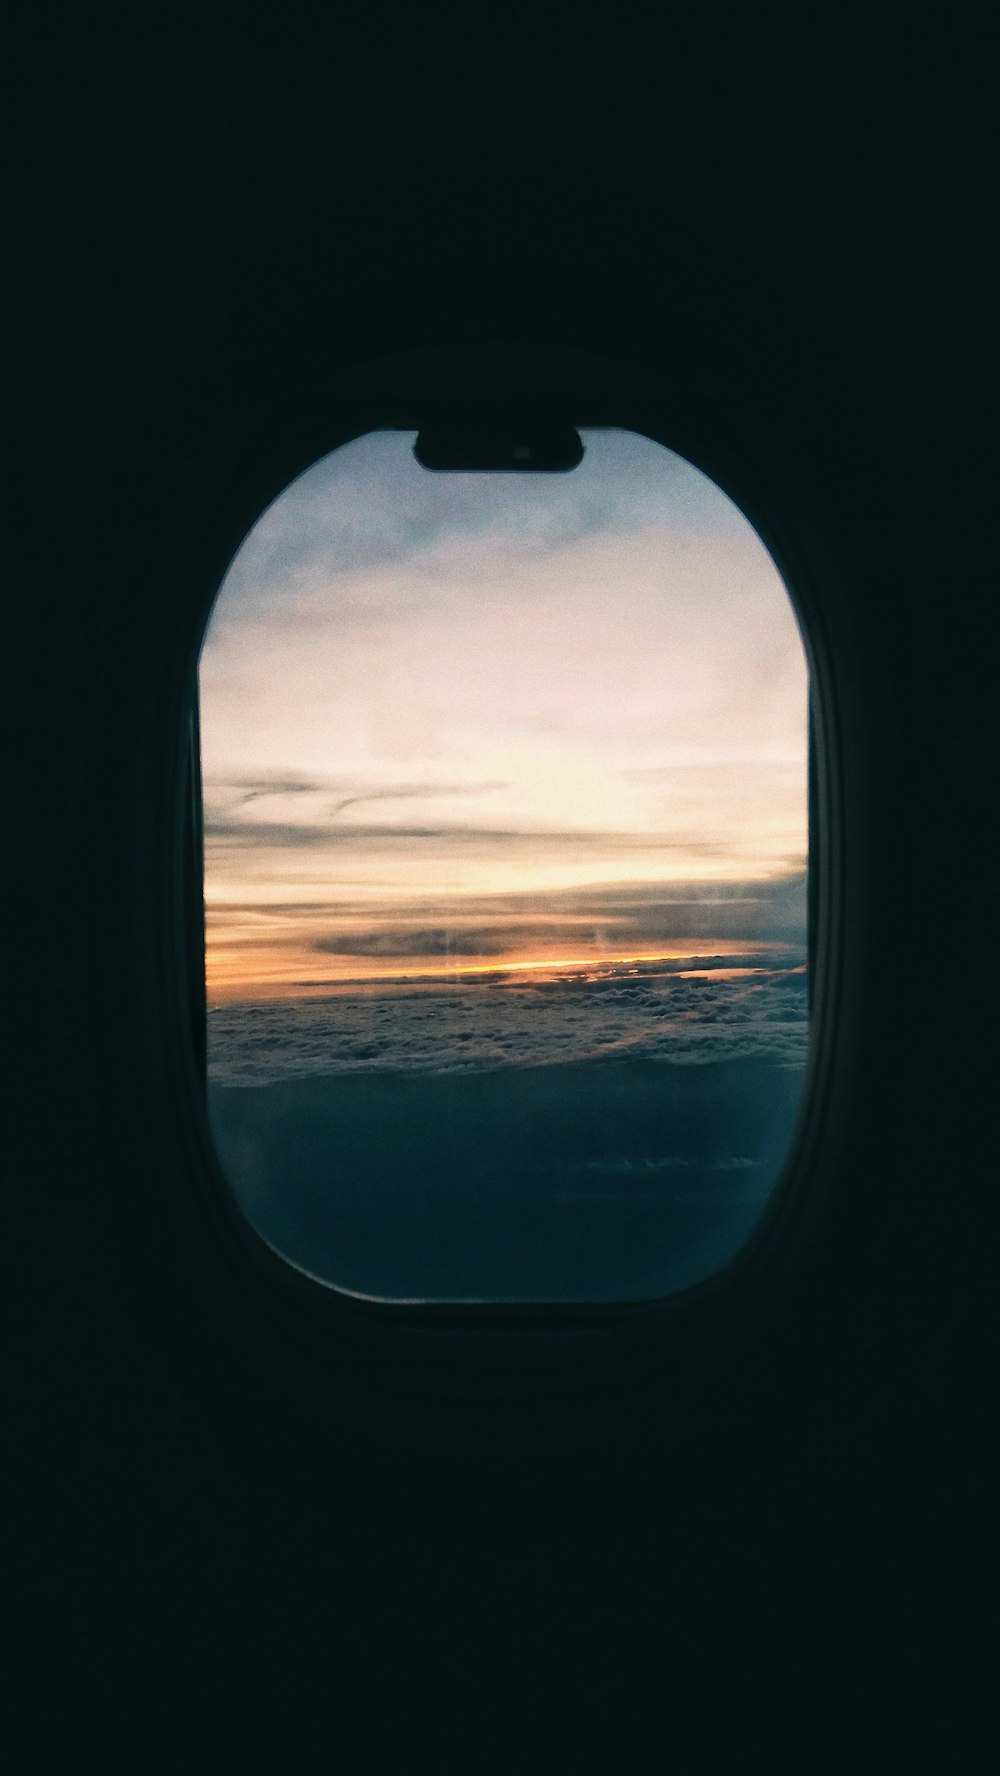 glass airplane window during golden hour